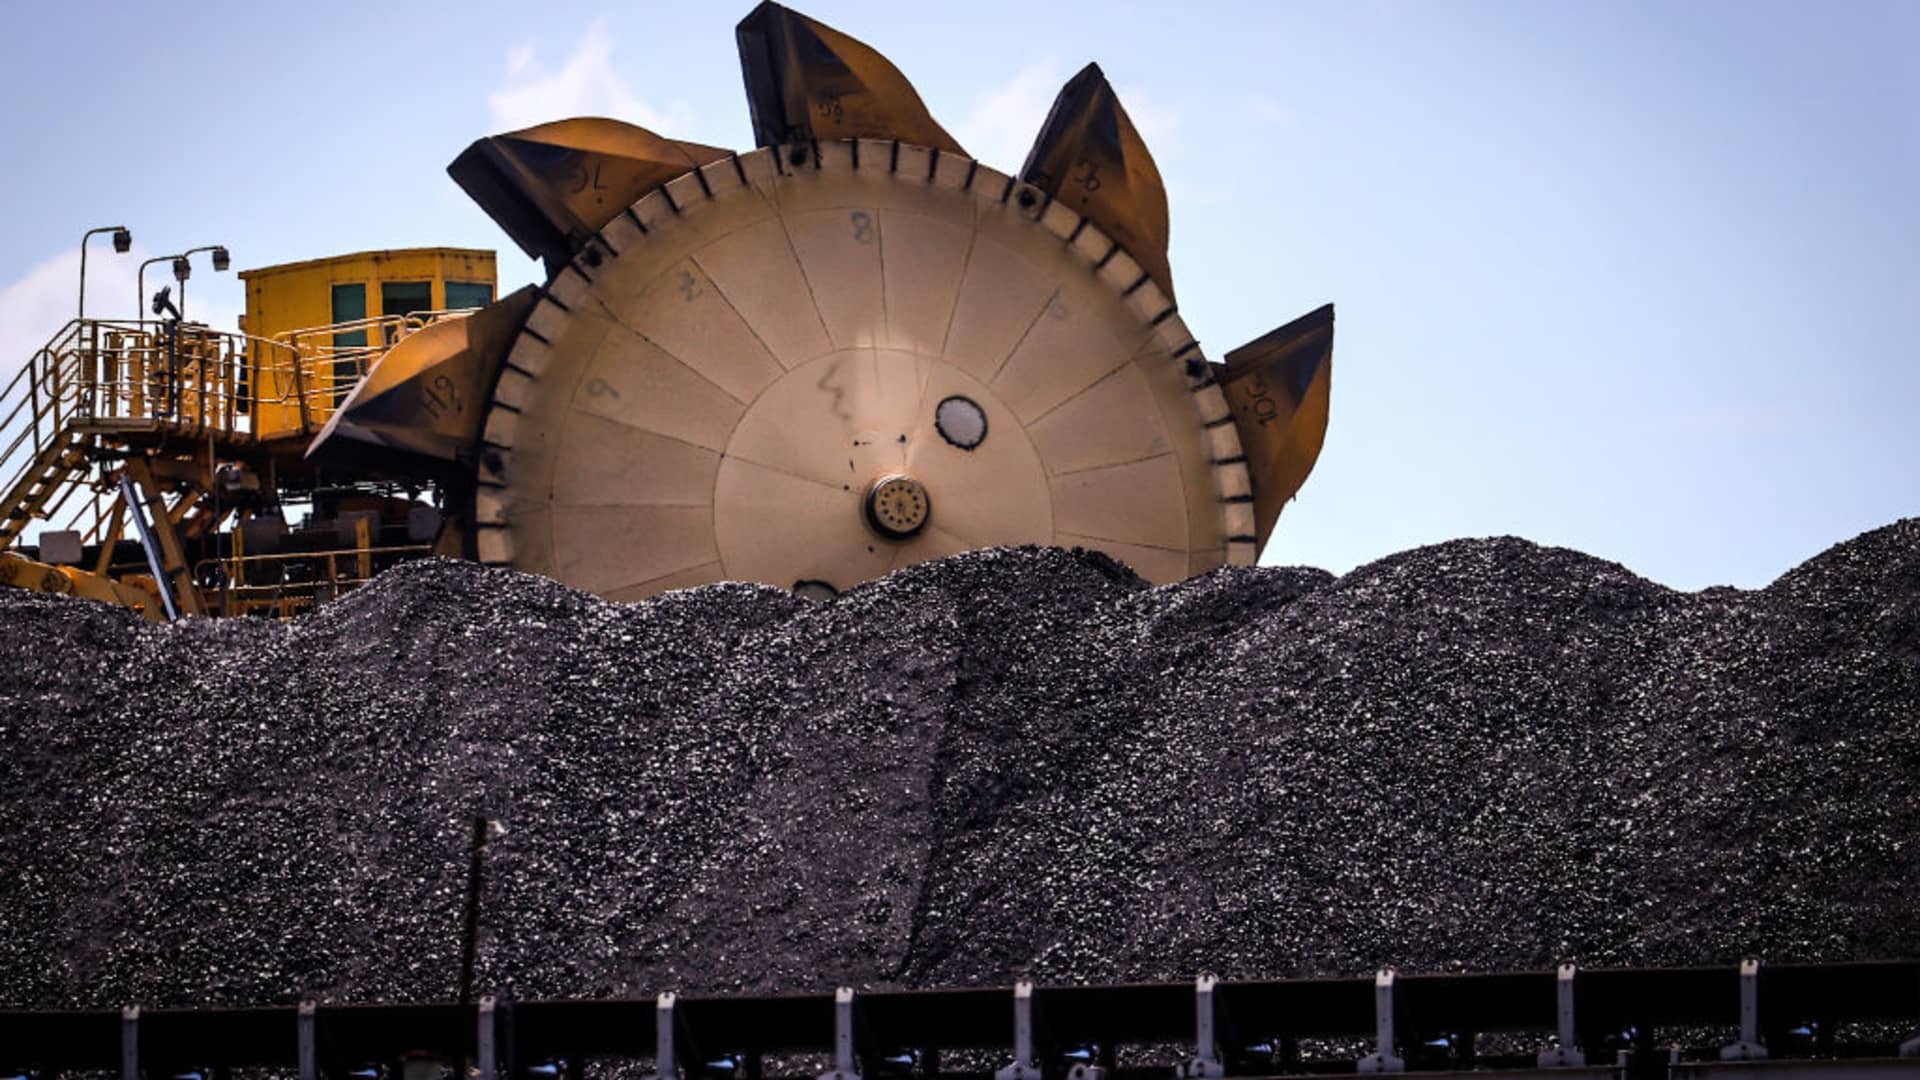 A bucket-wheel reclaimer stands next to a pile of coal at the Port of Newcastle in Newcastle, New South Wales, Australia, on Monday, Oct. 12, 2020.